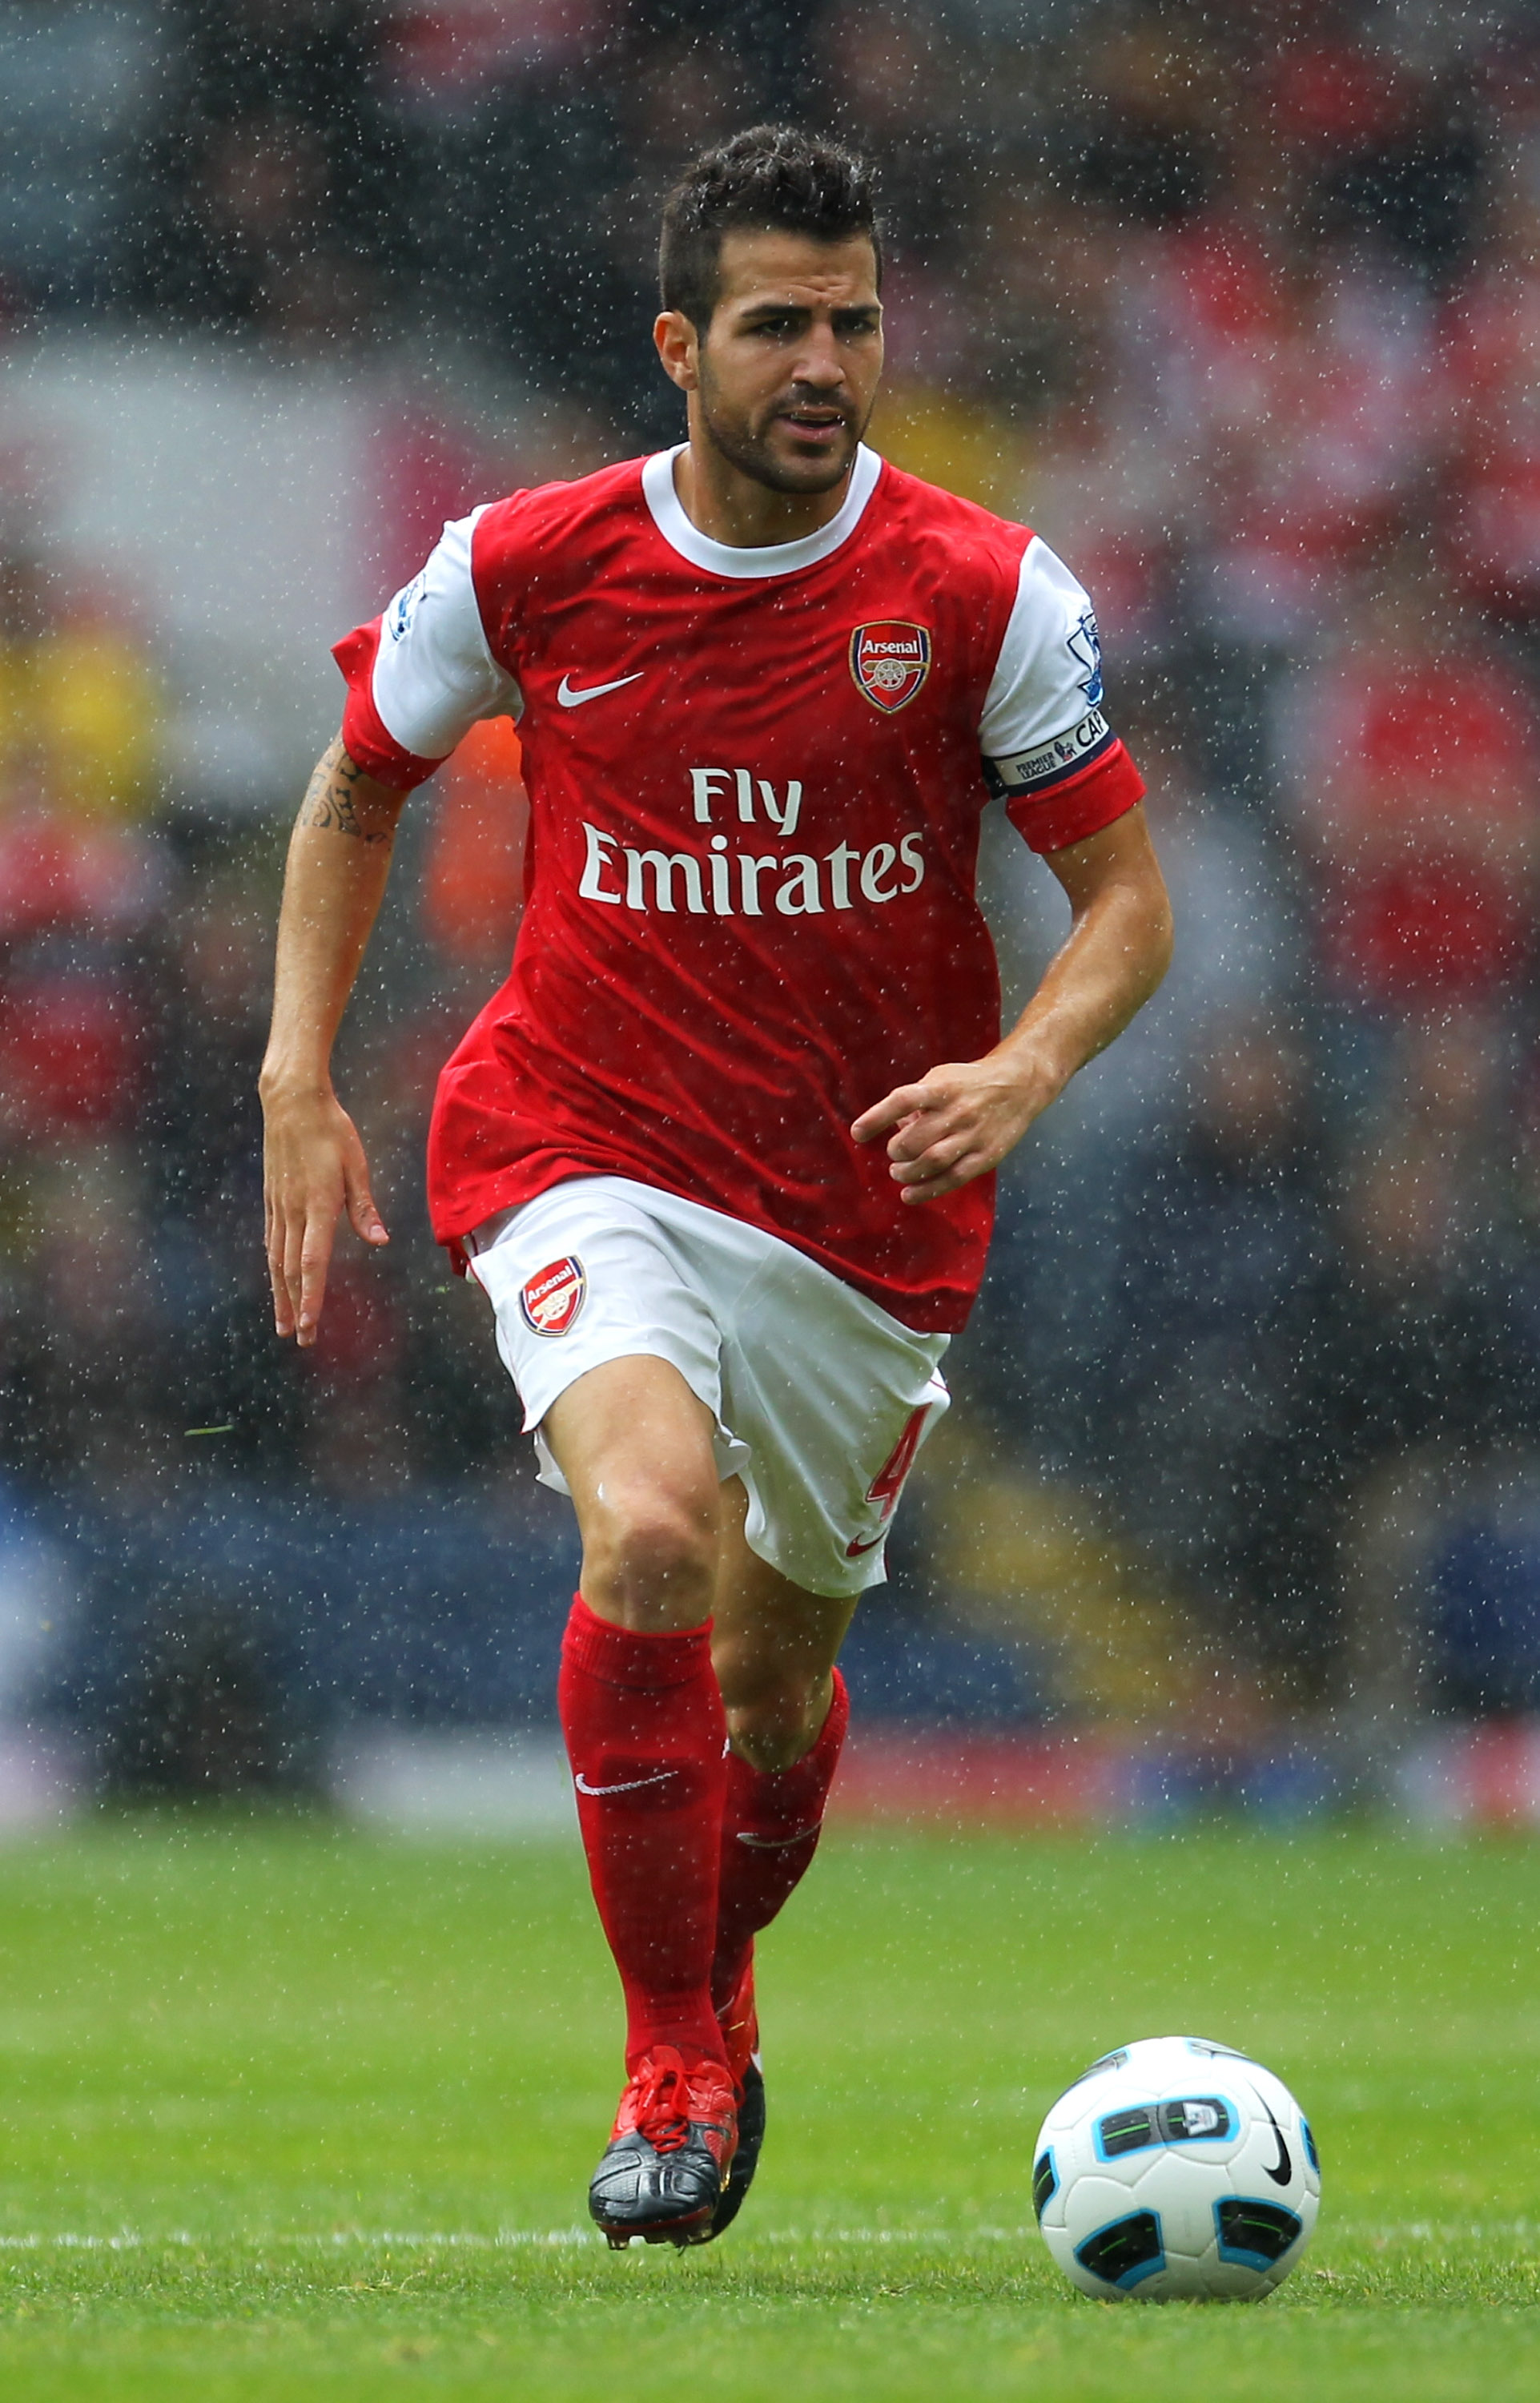 BLACKBURN, ENGLAND - AUGUST 28:   Cesc Fabregas of Arsenal in action during the Barclays Premier League match between Blackburn Rovers and Arsenal at Ewood Park on August 28, 2010 in Blackburn, England.  (Photo by Alex Livesey/Getty Images)